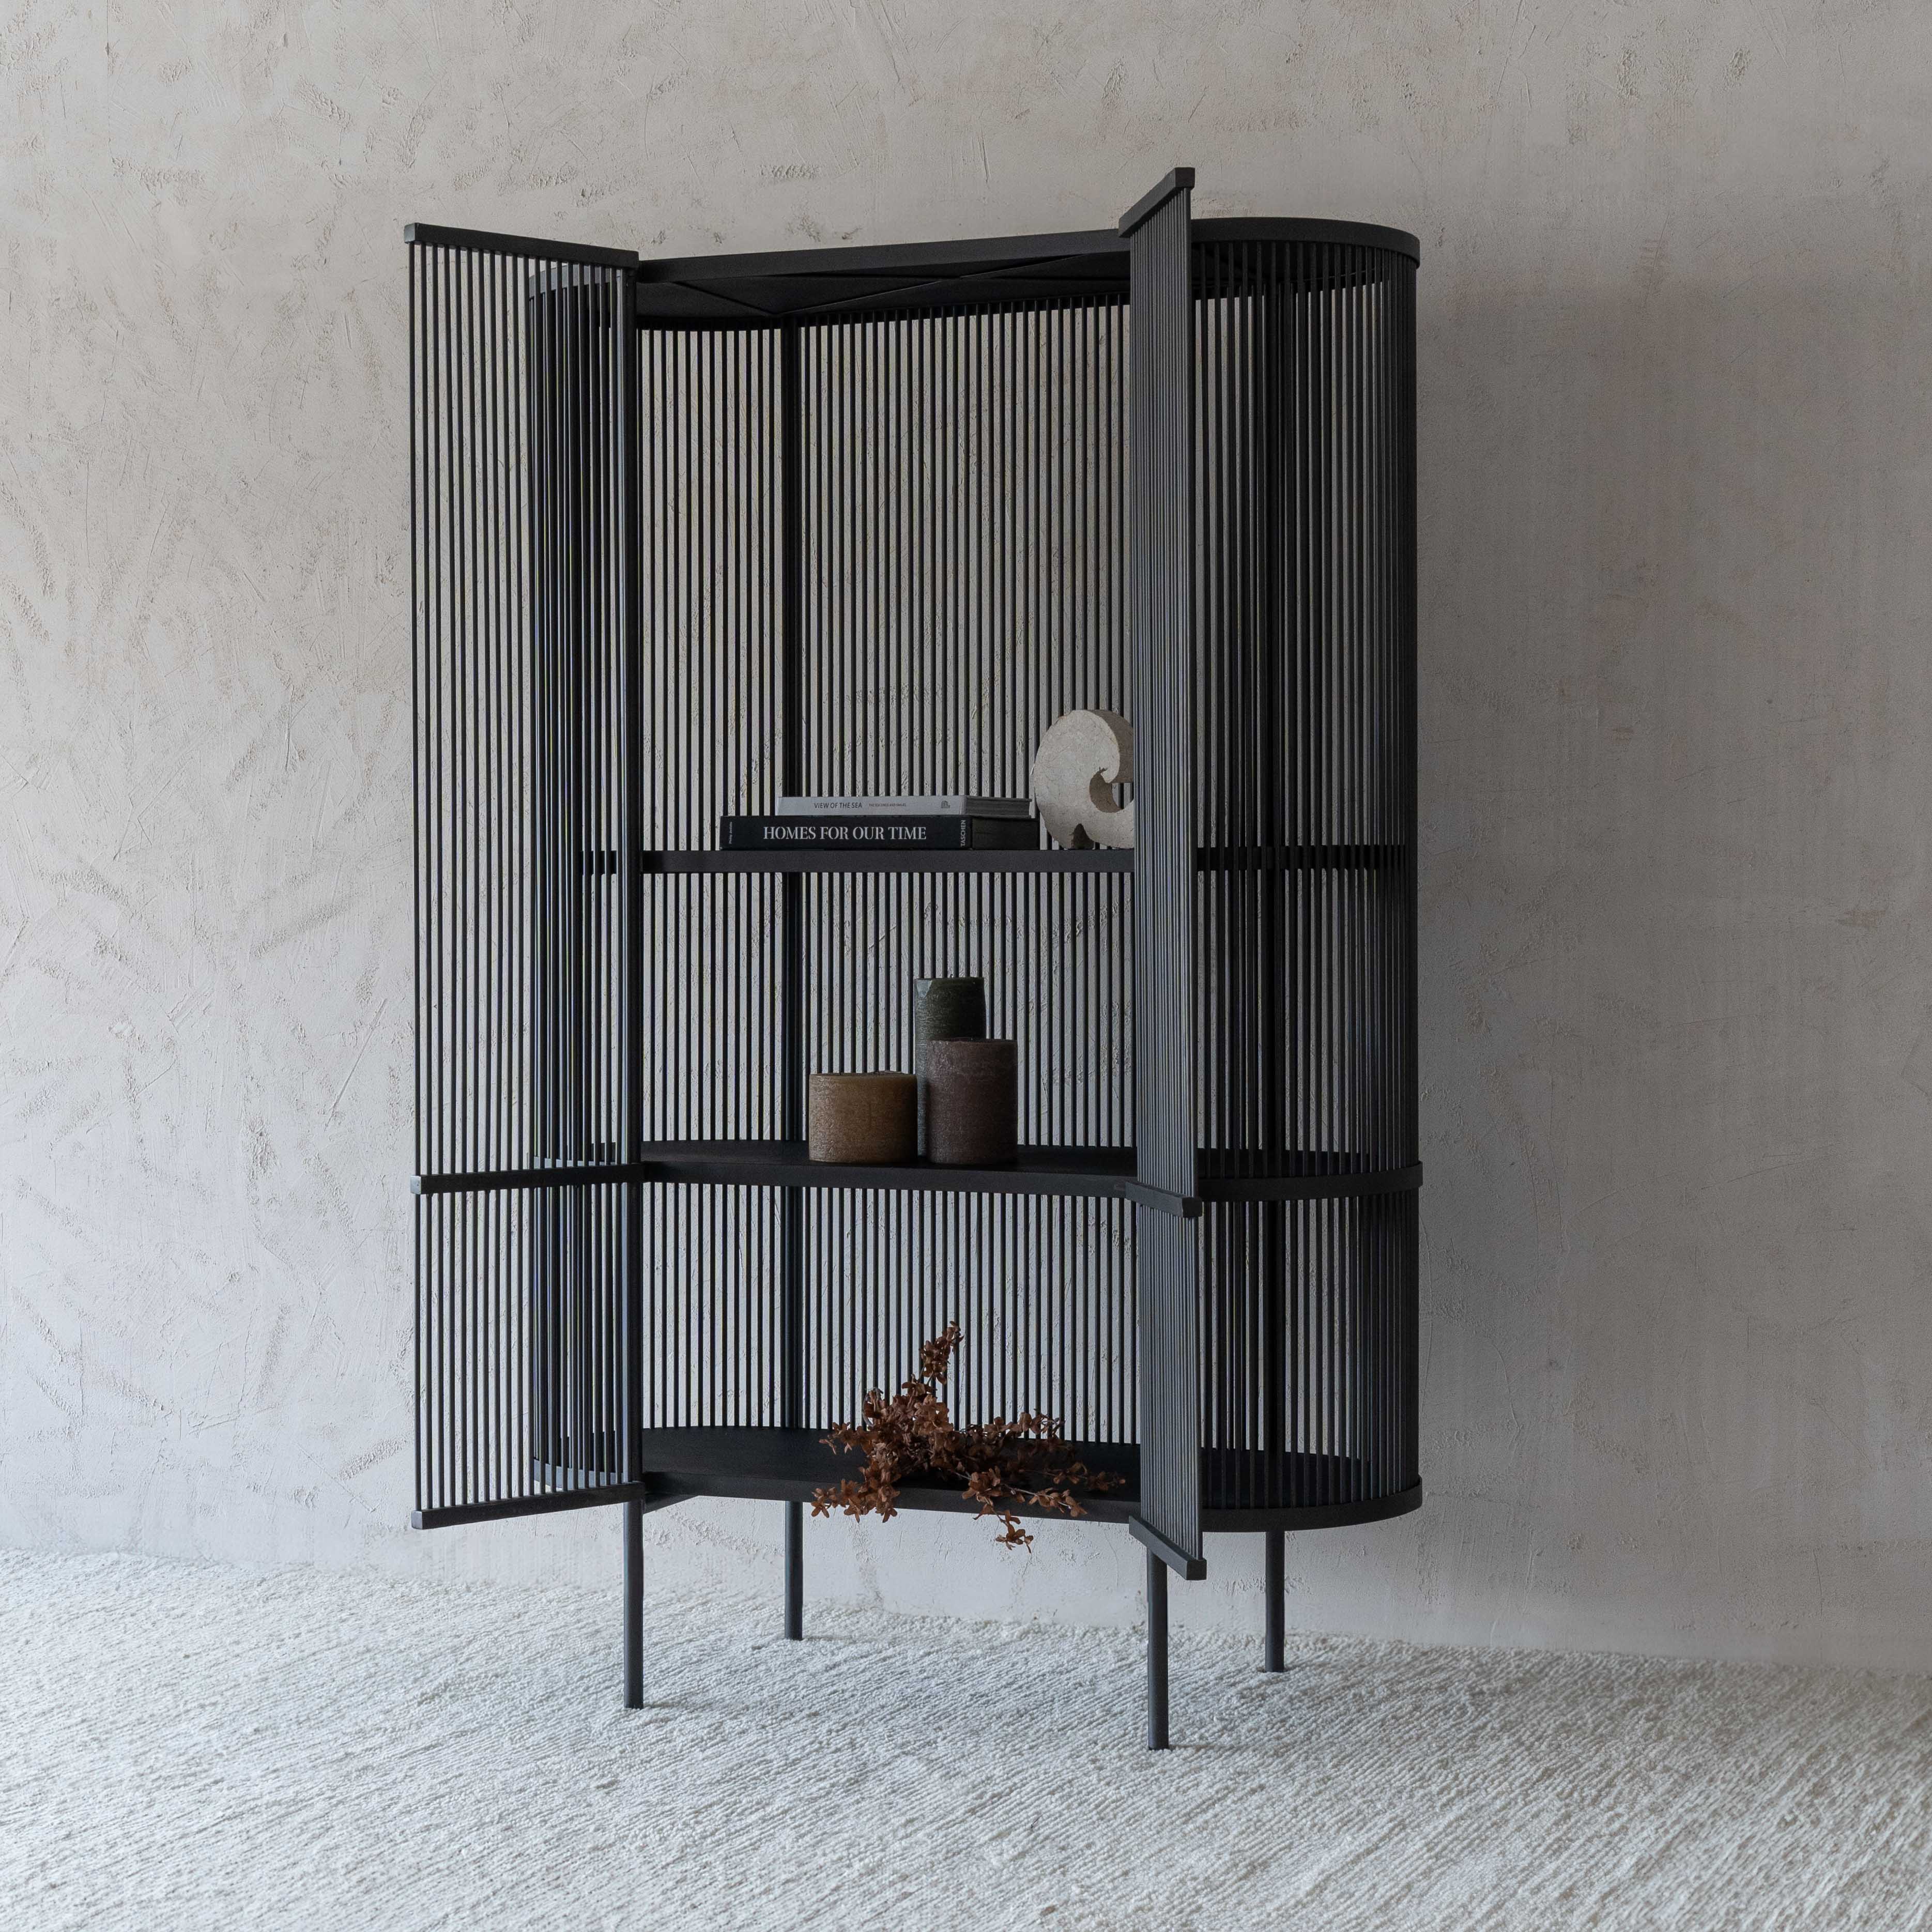 Ananya Handcrafted Steel Storage Cabinet - Cabinets - WS Living - UAE Wood and steel Furnitures in Dubai